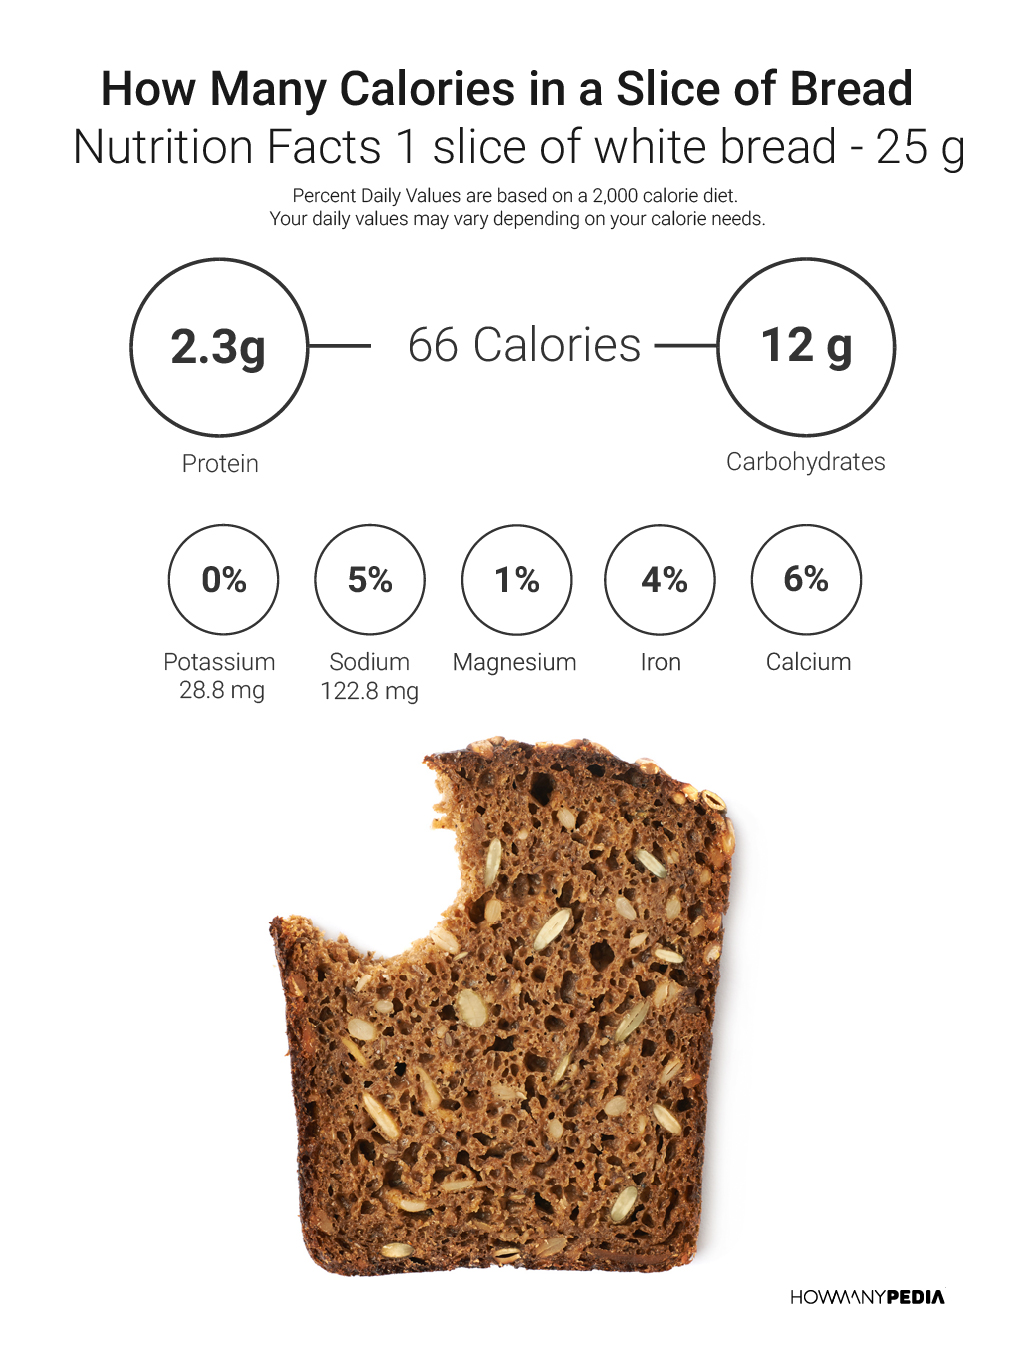 How Many Calories in a Slice of Bread Nutrition Facts